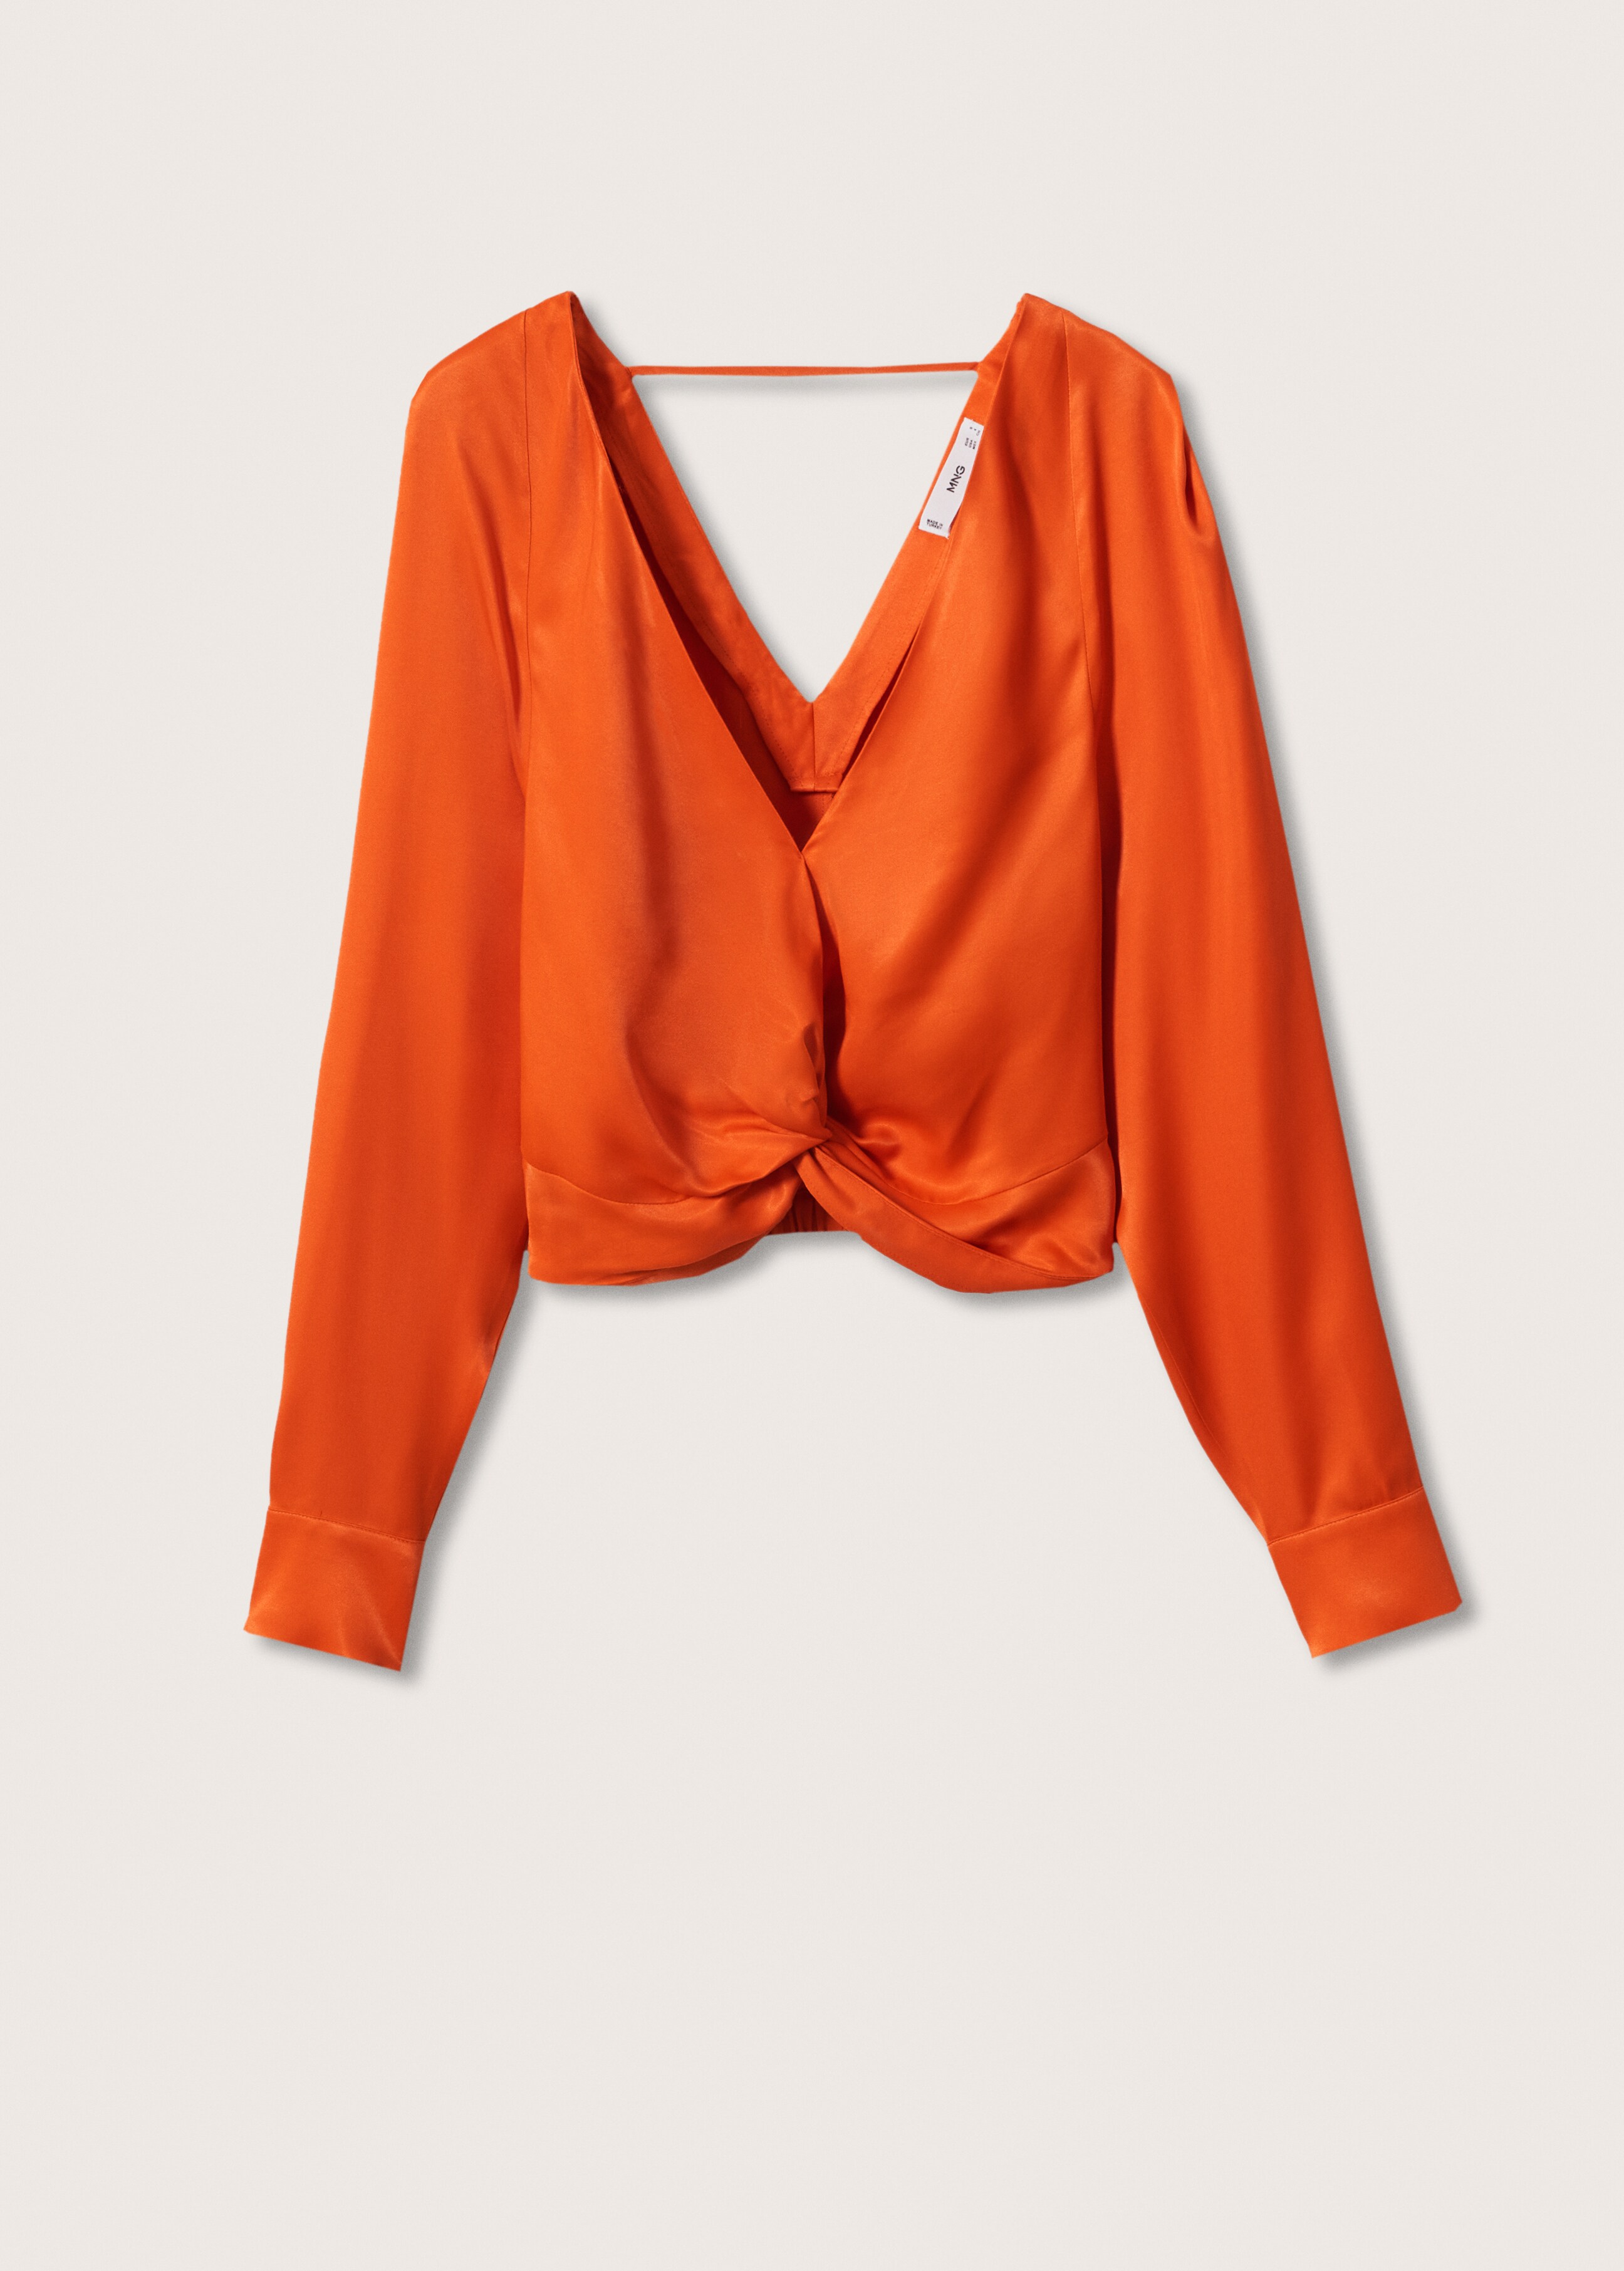 Satin crop blouse - Article without model